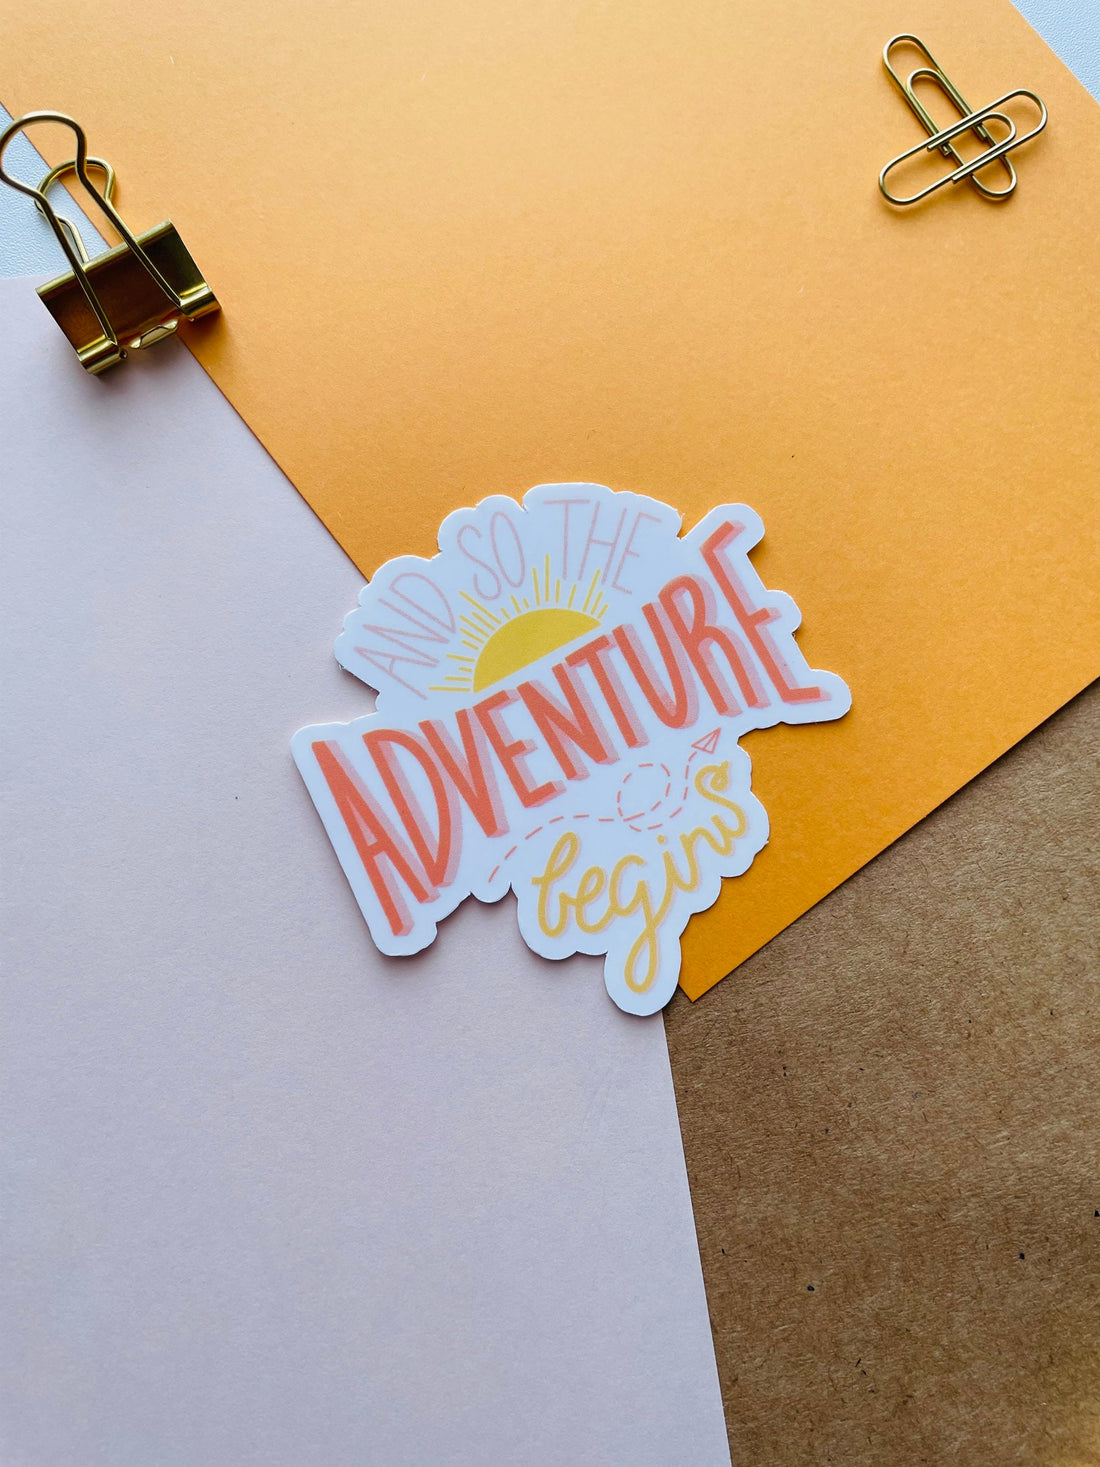 And so the Adventure Begins Glossy Vinyl Sticker